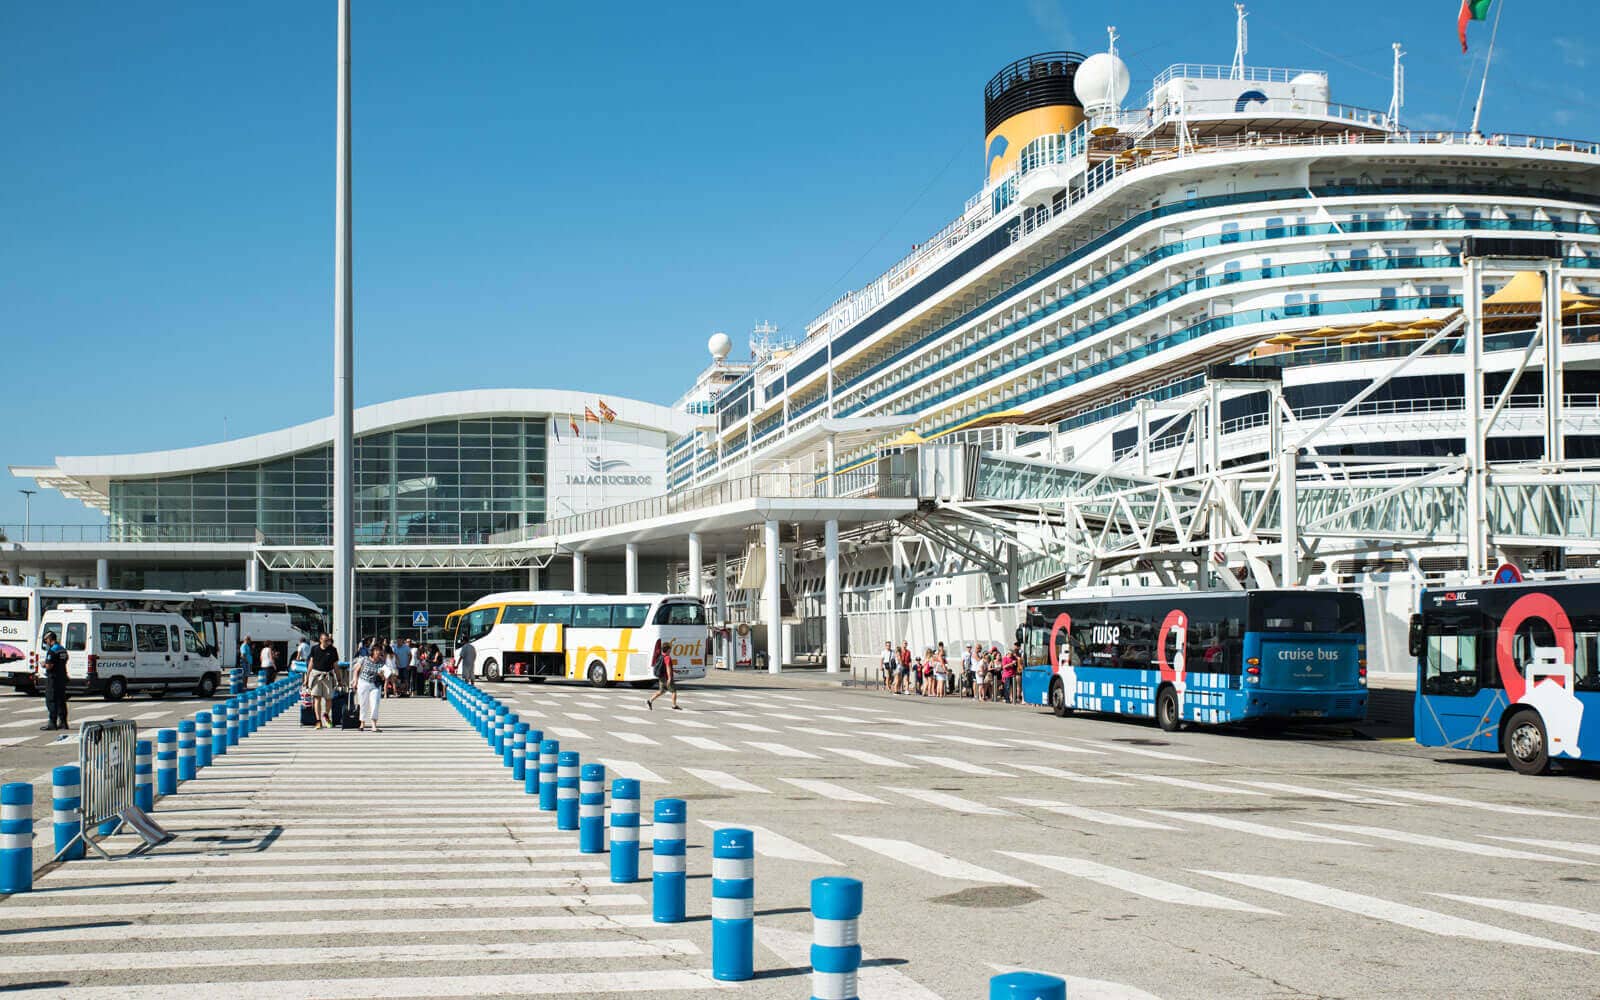 barcelona cruise ship passengers get off at the dock